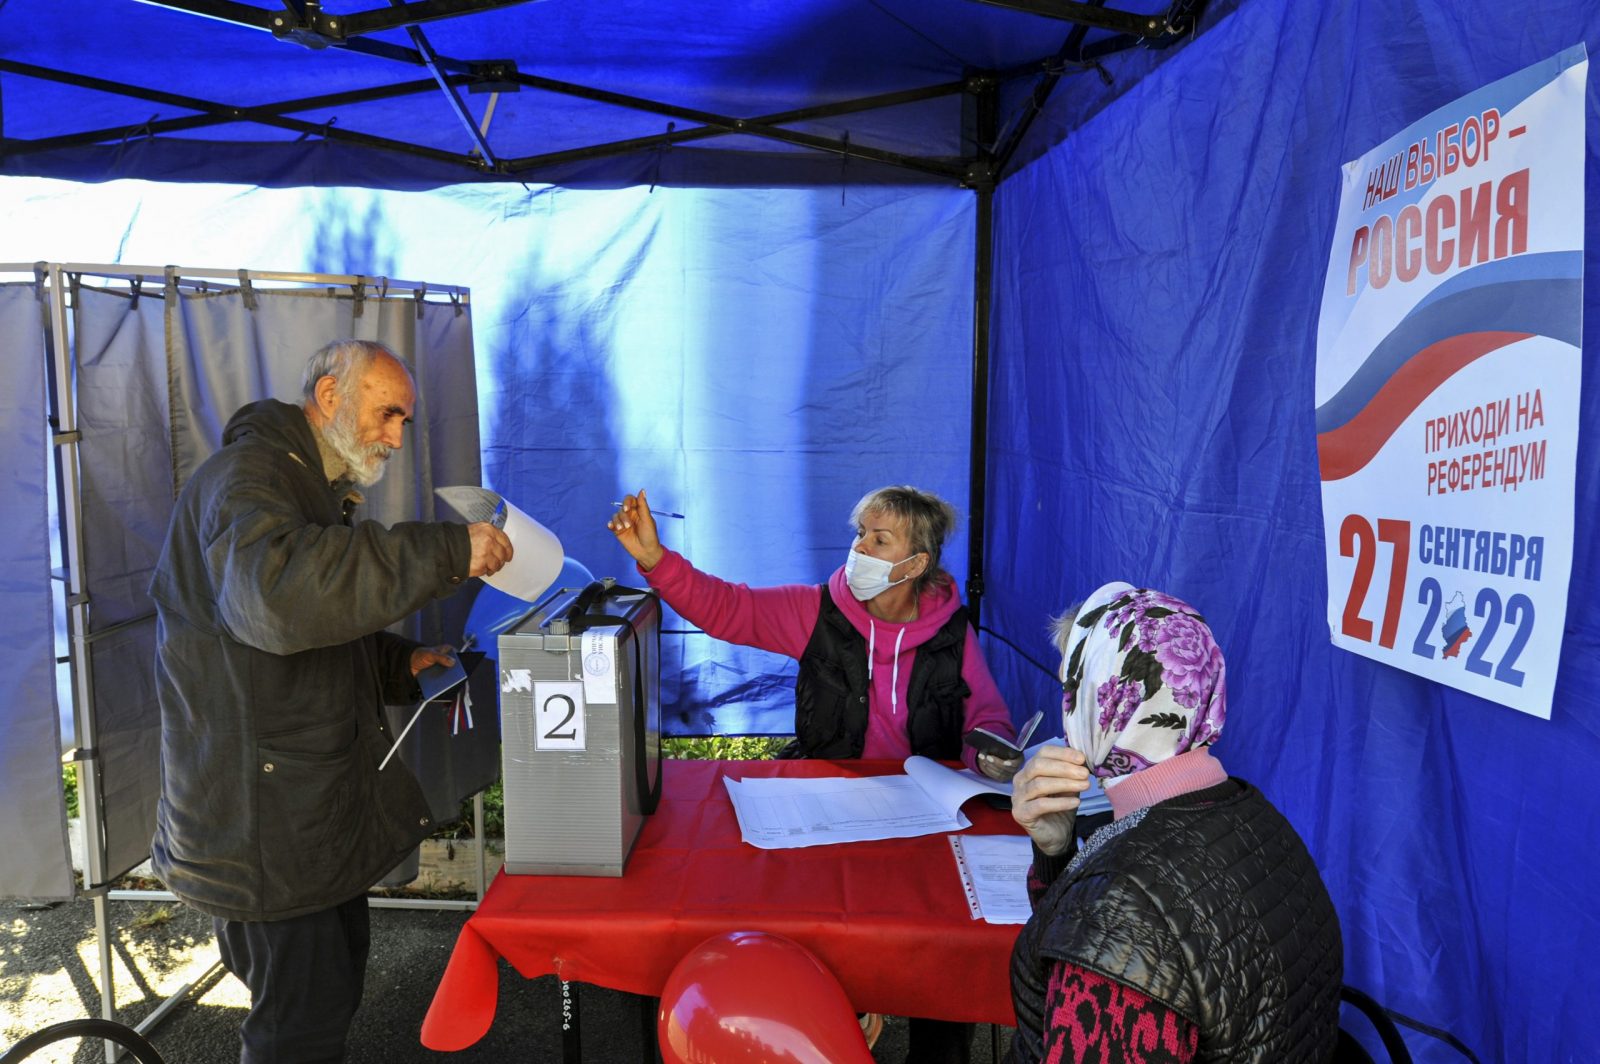 epa10204182 A refugee from Ukraine (L) casts his ballots at a polling station in a temporary accommodation facility for refugees during voting in a referendum on the joining of Russian-controlled regions of Ukraine to Russia, in Novocherkassk, Rostov region, Russia, 24 September 2022. From 23 to 27 September, residents of the self-proclaimed Luhansk and Donetsk People's Republics as well as the Russian-controlled areas of the Kherson and Zaporizhzhia regions of Ukraine vote in a referendum to join the Russian Federation. On 24 February 2022 Russian troops entered the Ukrainian territory in what the Russian president declared a 'Special Military Operation', starting an armed conflict that has provoked destruction and a humanitarian crisis. Since then, more than 3.3 million refugees from eastern and southern Ukraine have entered Russia through the Rostov region, according to data published on 22 September by the press service of its regional government.  EPA/STRINGER